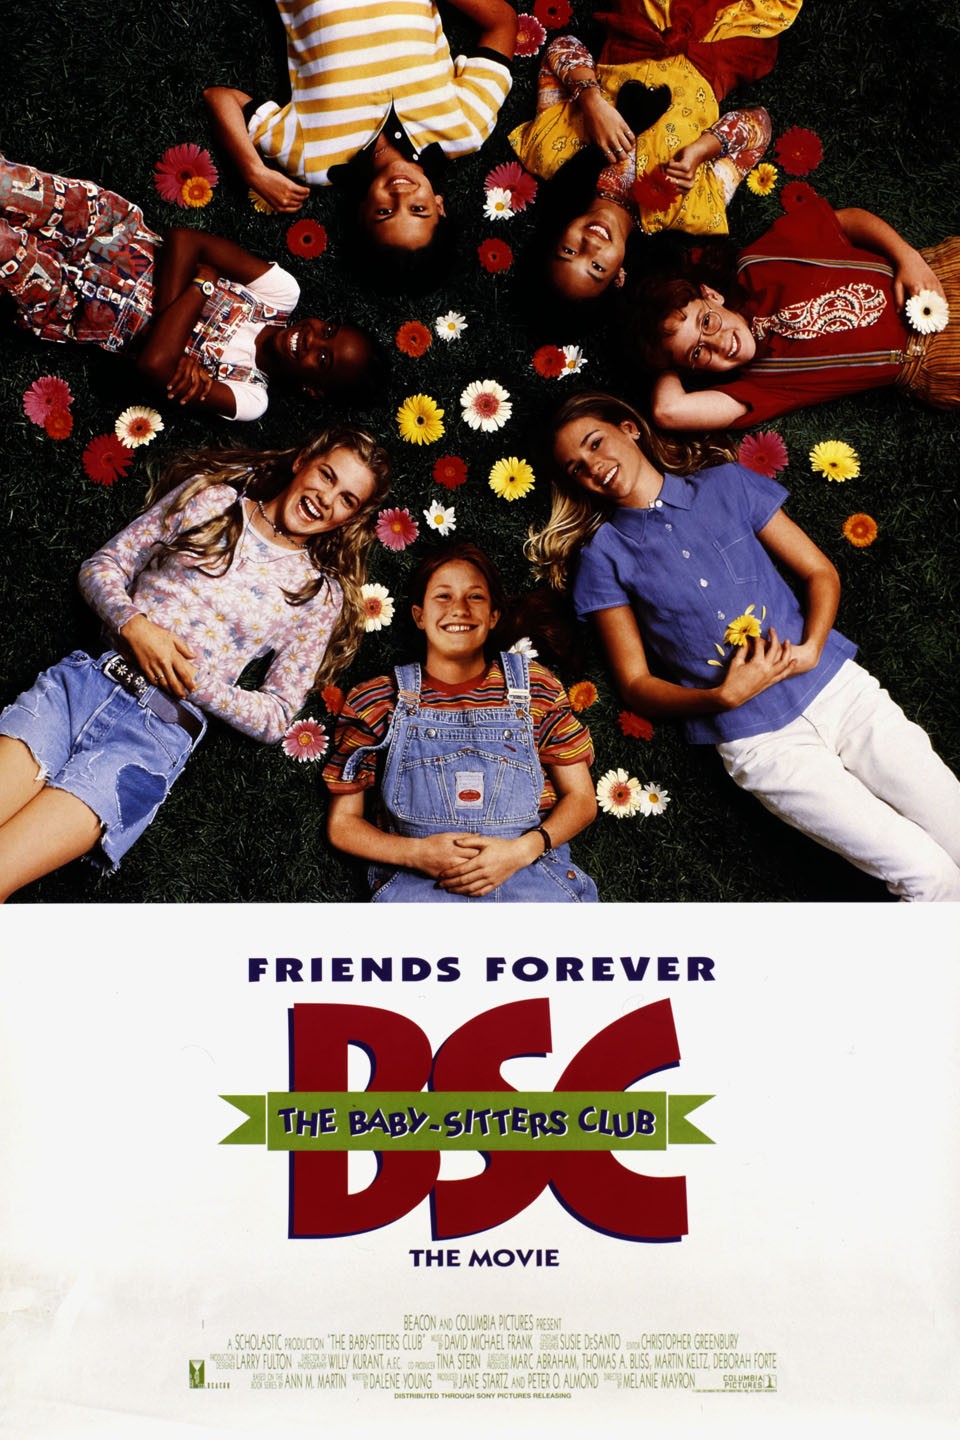 dakota pippin recommends babysitters club movie online pic